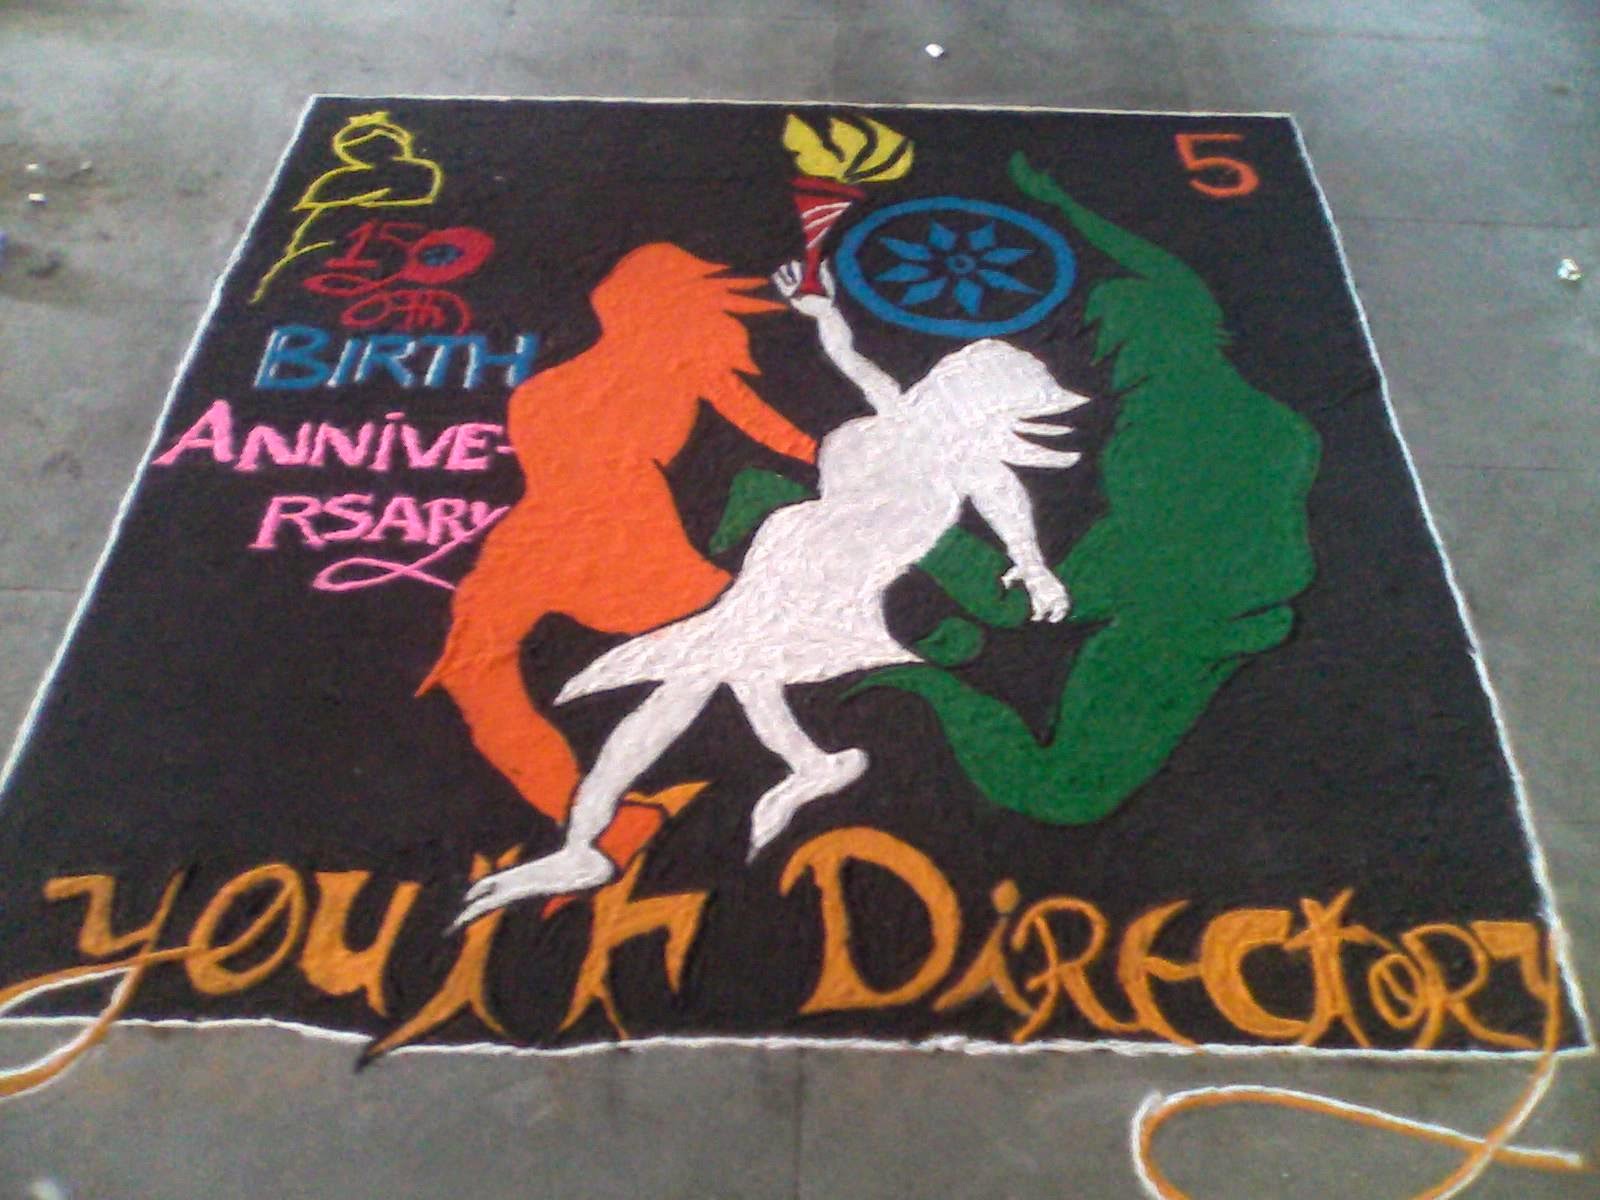 Theme based Rangoli designs for competition in college